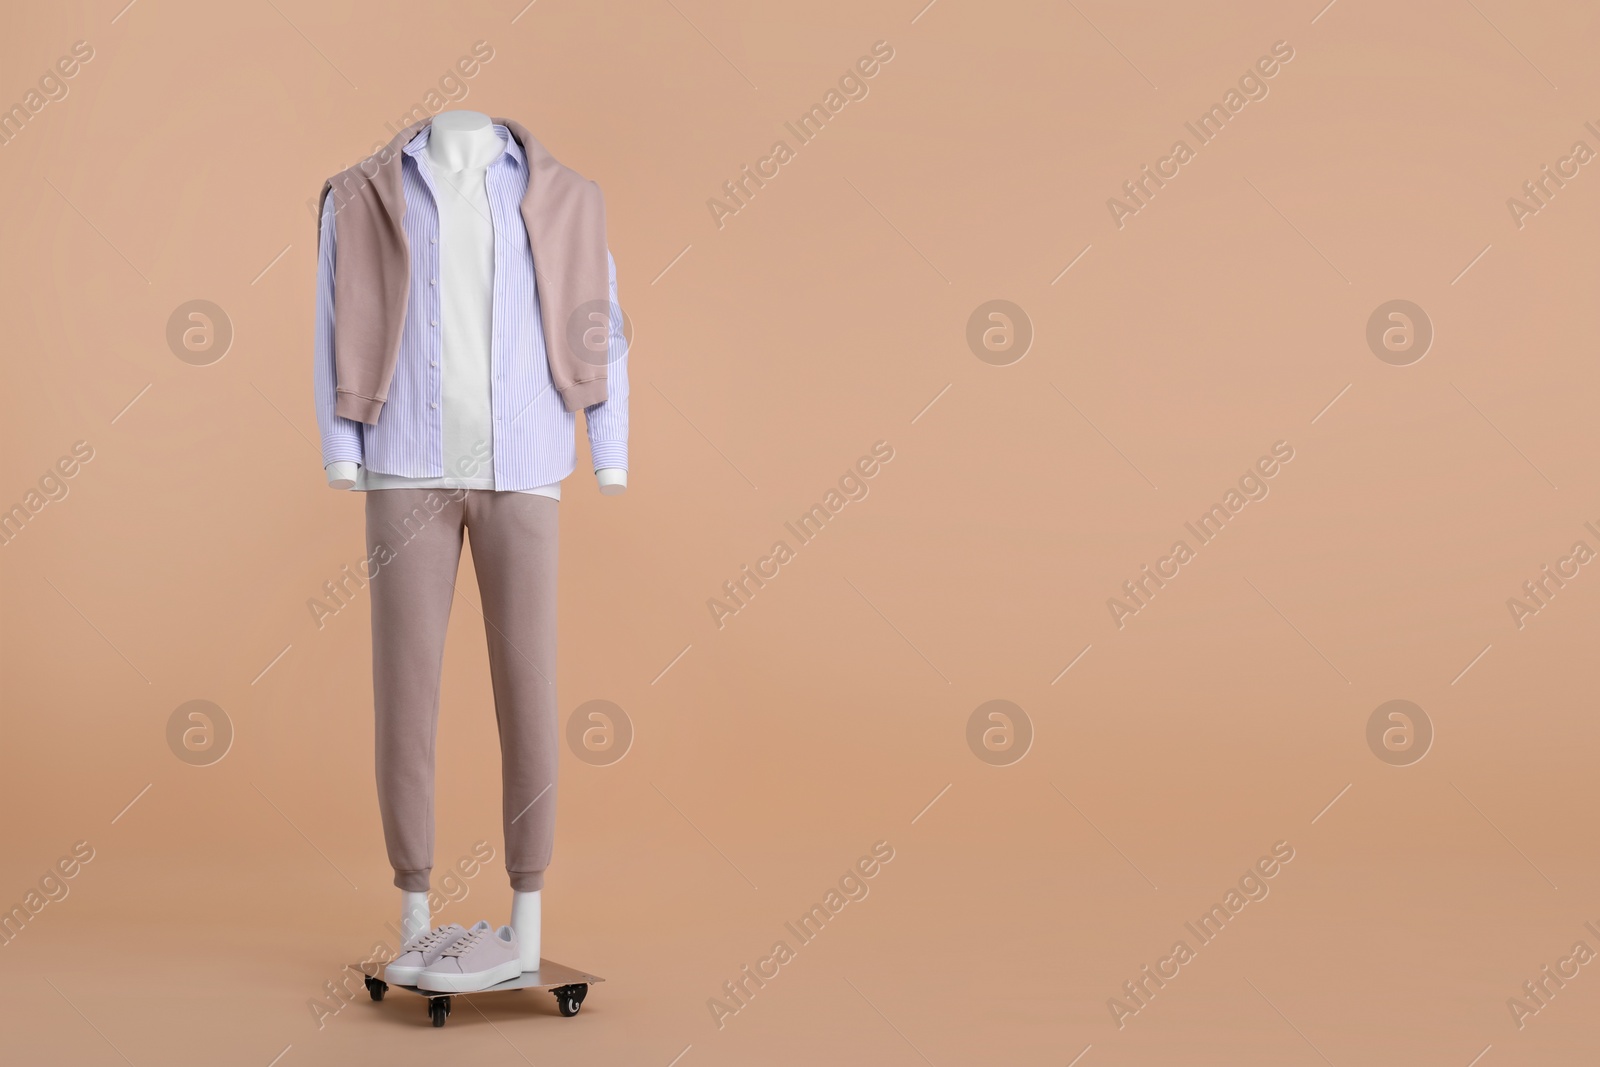 Photo of Male mannequin with sneakers dressed in white t-shirt, sweater, striped shirt and pants on beige background, space for text